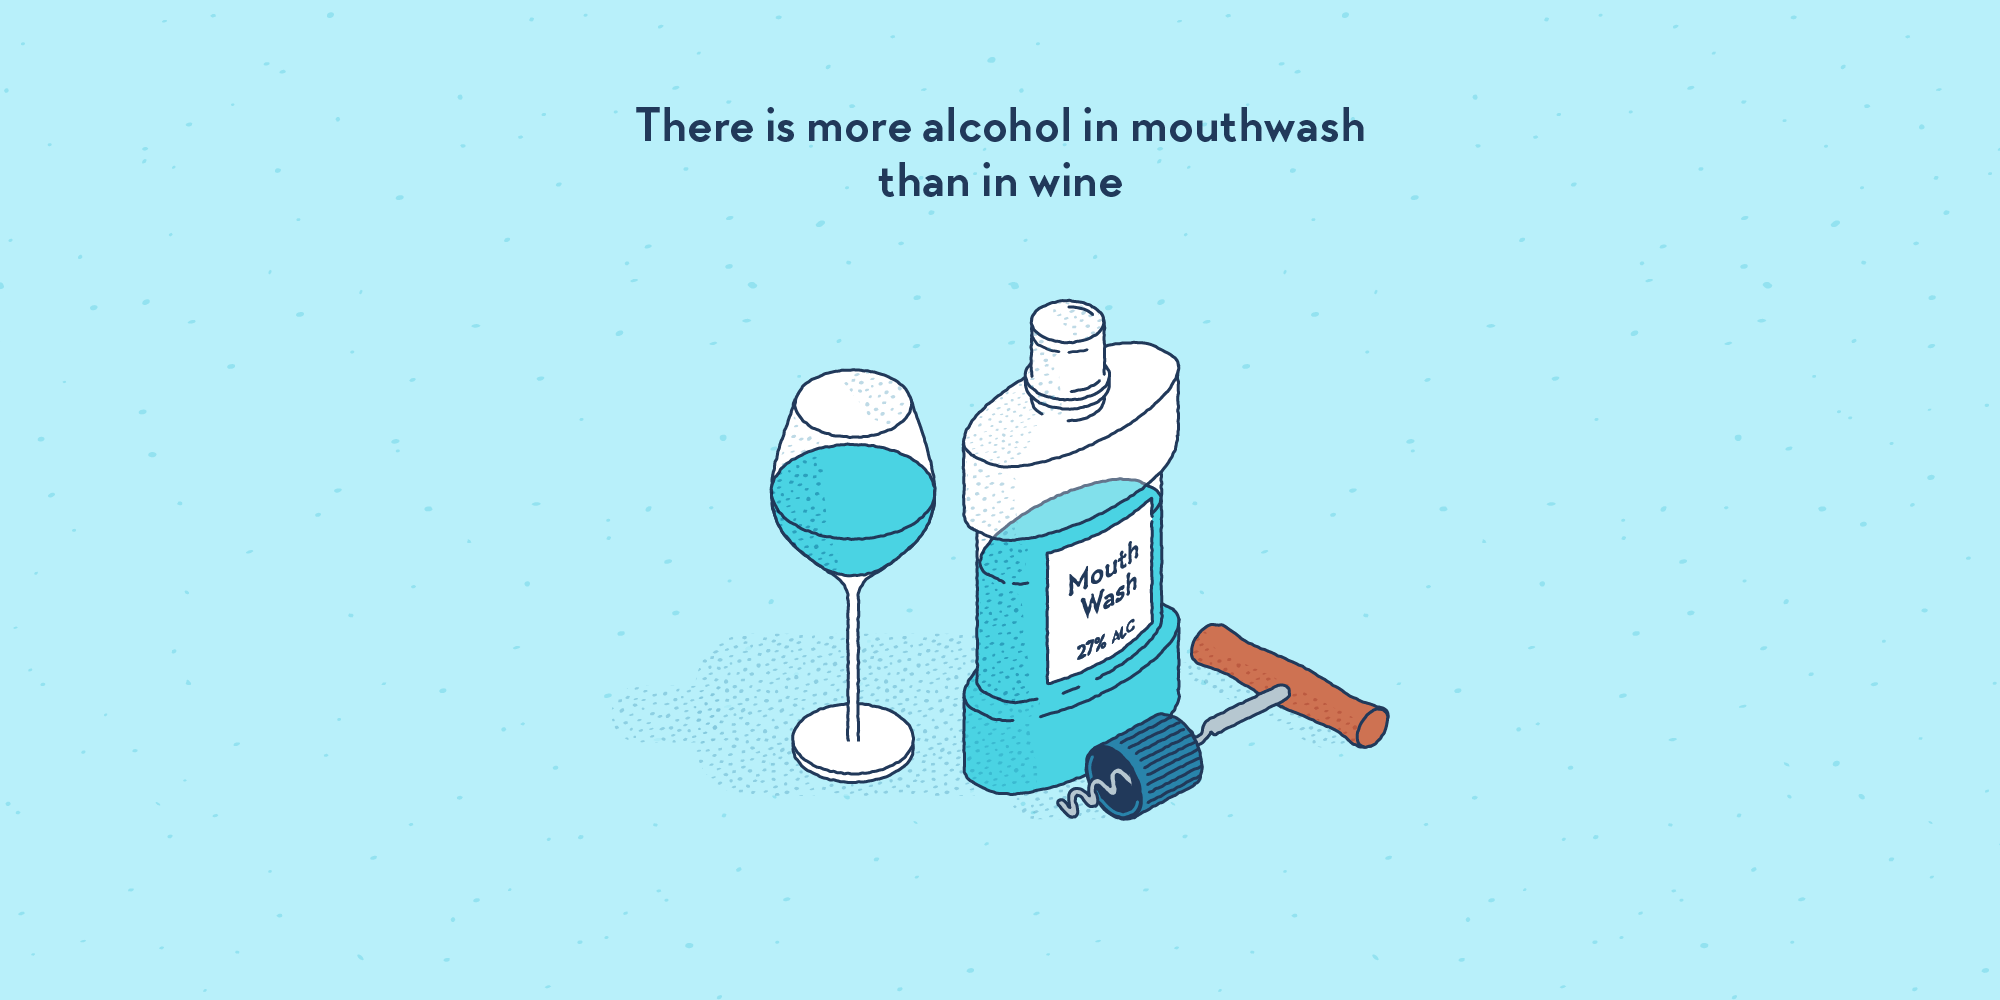 A bottle of blue mouthwash, opened with a corkscrew, some of it having being served in a wine glass.